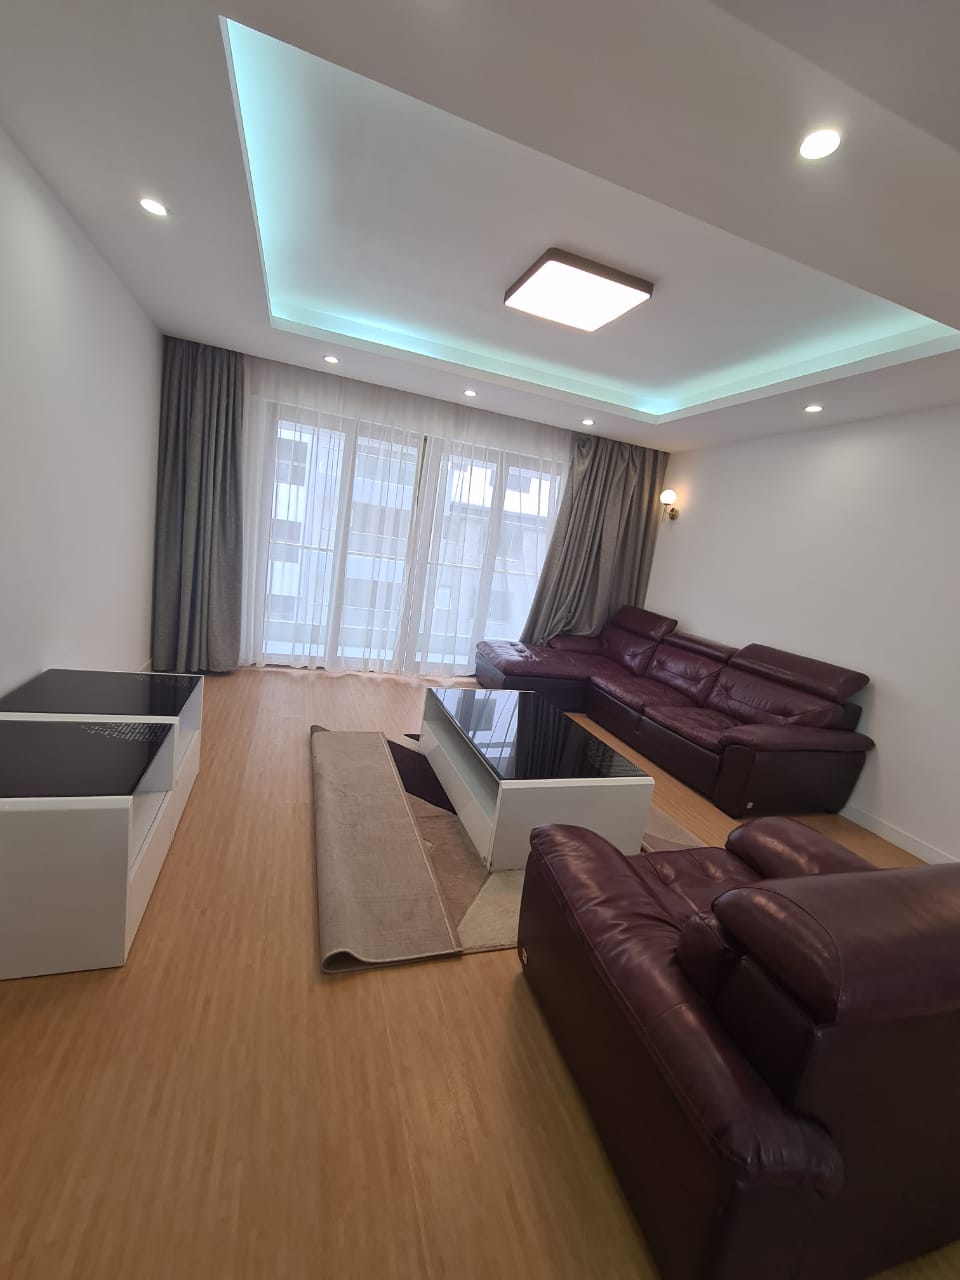 Hot Deal: Homely 4 Bedroom Apartment with DSQ for Sale in Lavington at Ksh16.5M2